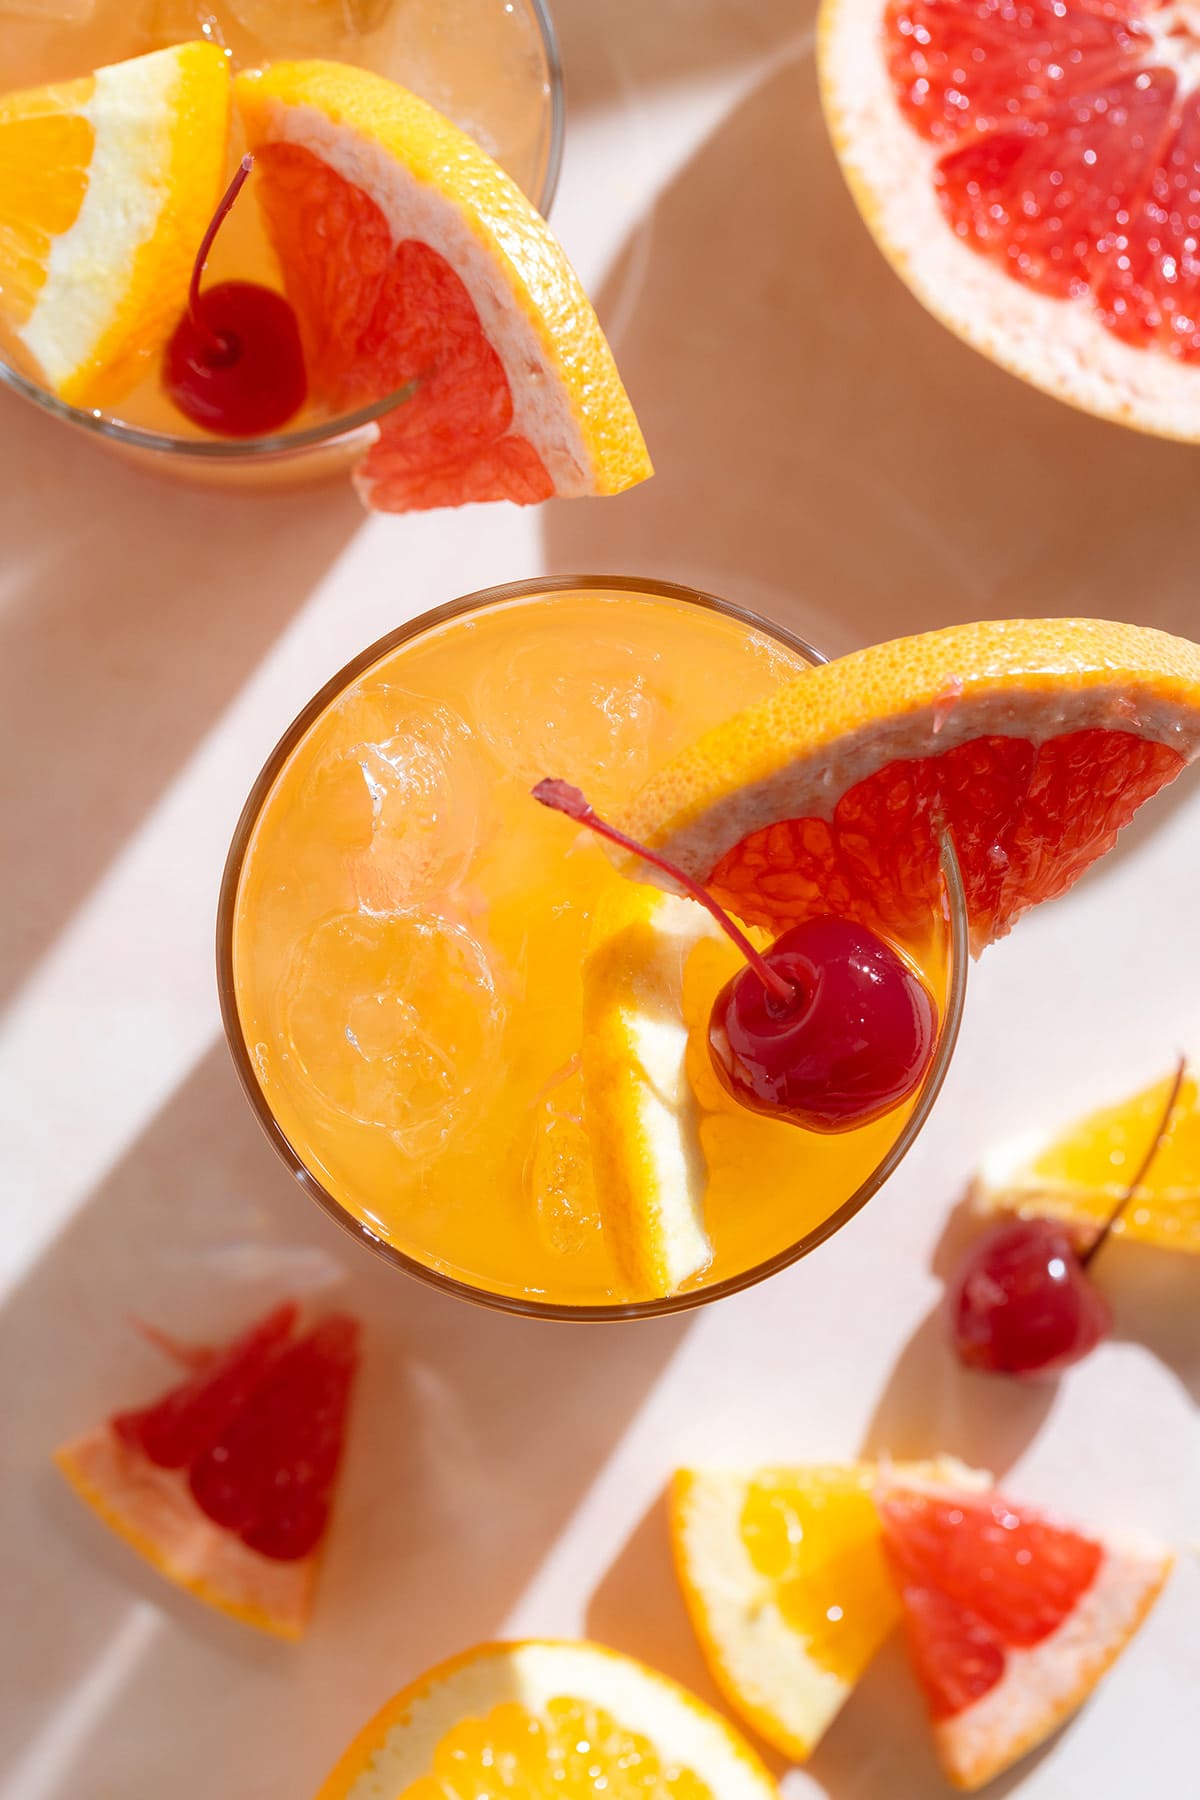 A tequila sunset cocktail in a tall glass with orange juice garnished with a cocktail cherry and a slice of grapefruit.